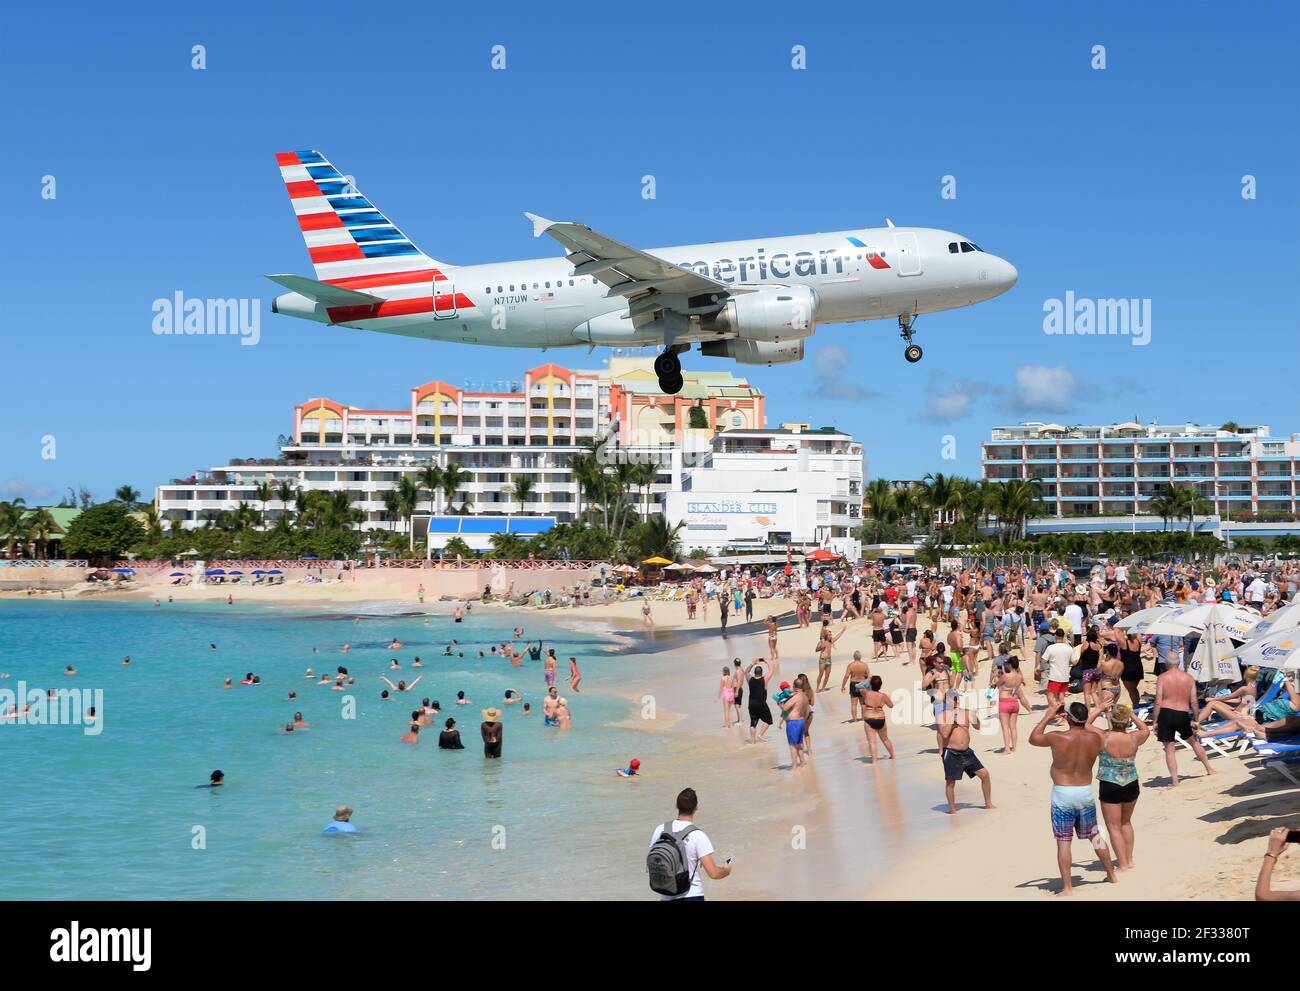 American Airlines Airbus A319 aircraft passing low over touristic Maho Beach in Saint Maarten, Dutch Antilles. Airport beach in St. Maarten. Stock Photo